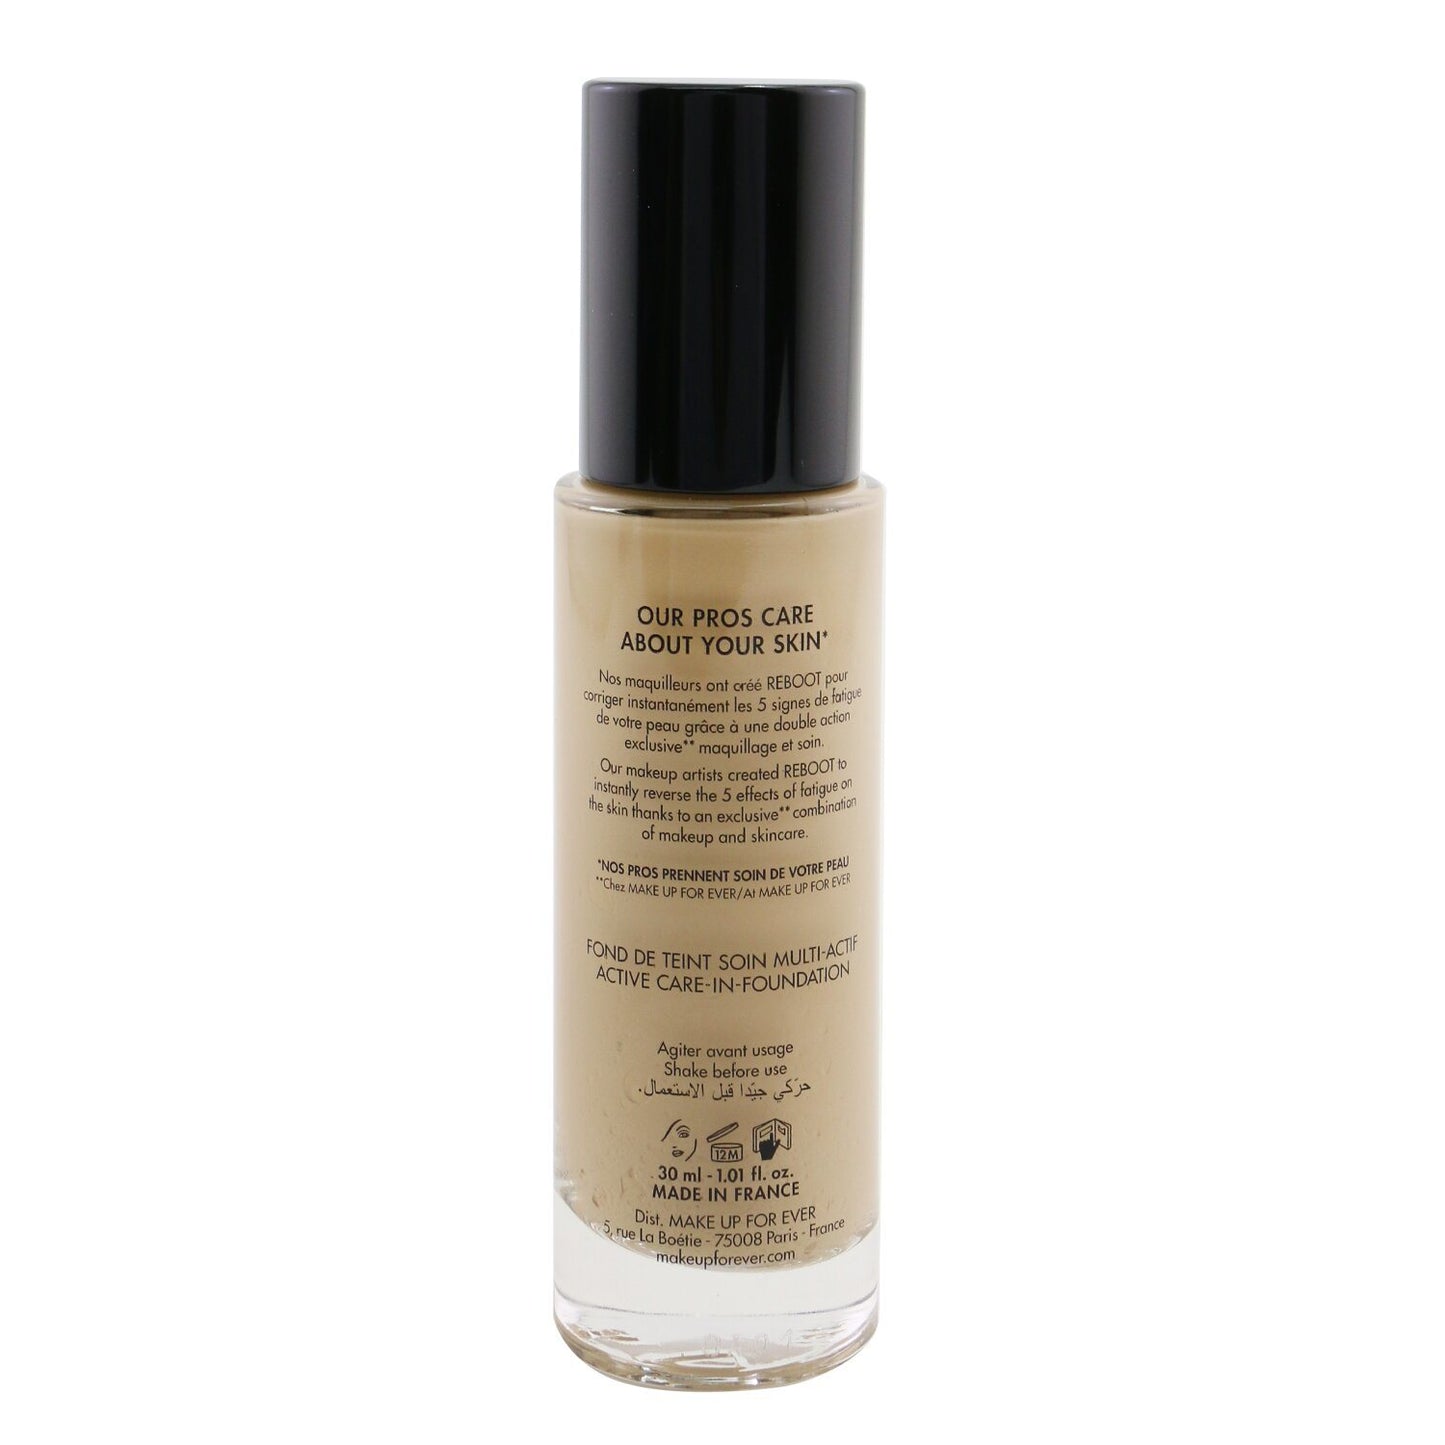 MAKE UP FOR EVER - Reboot Active Care In Foundation - # Y315 Sand 145398 30ml/1.01oz